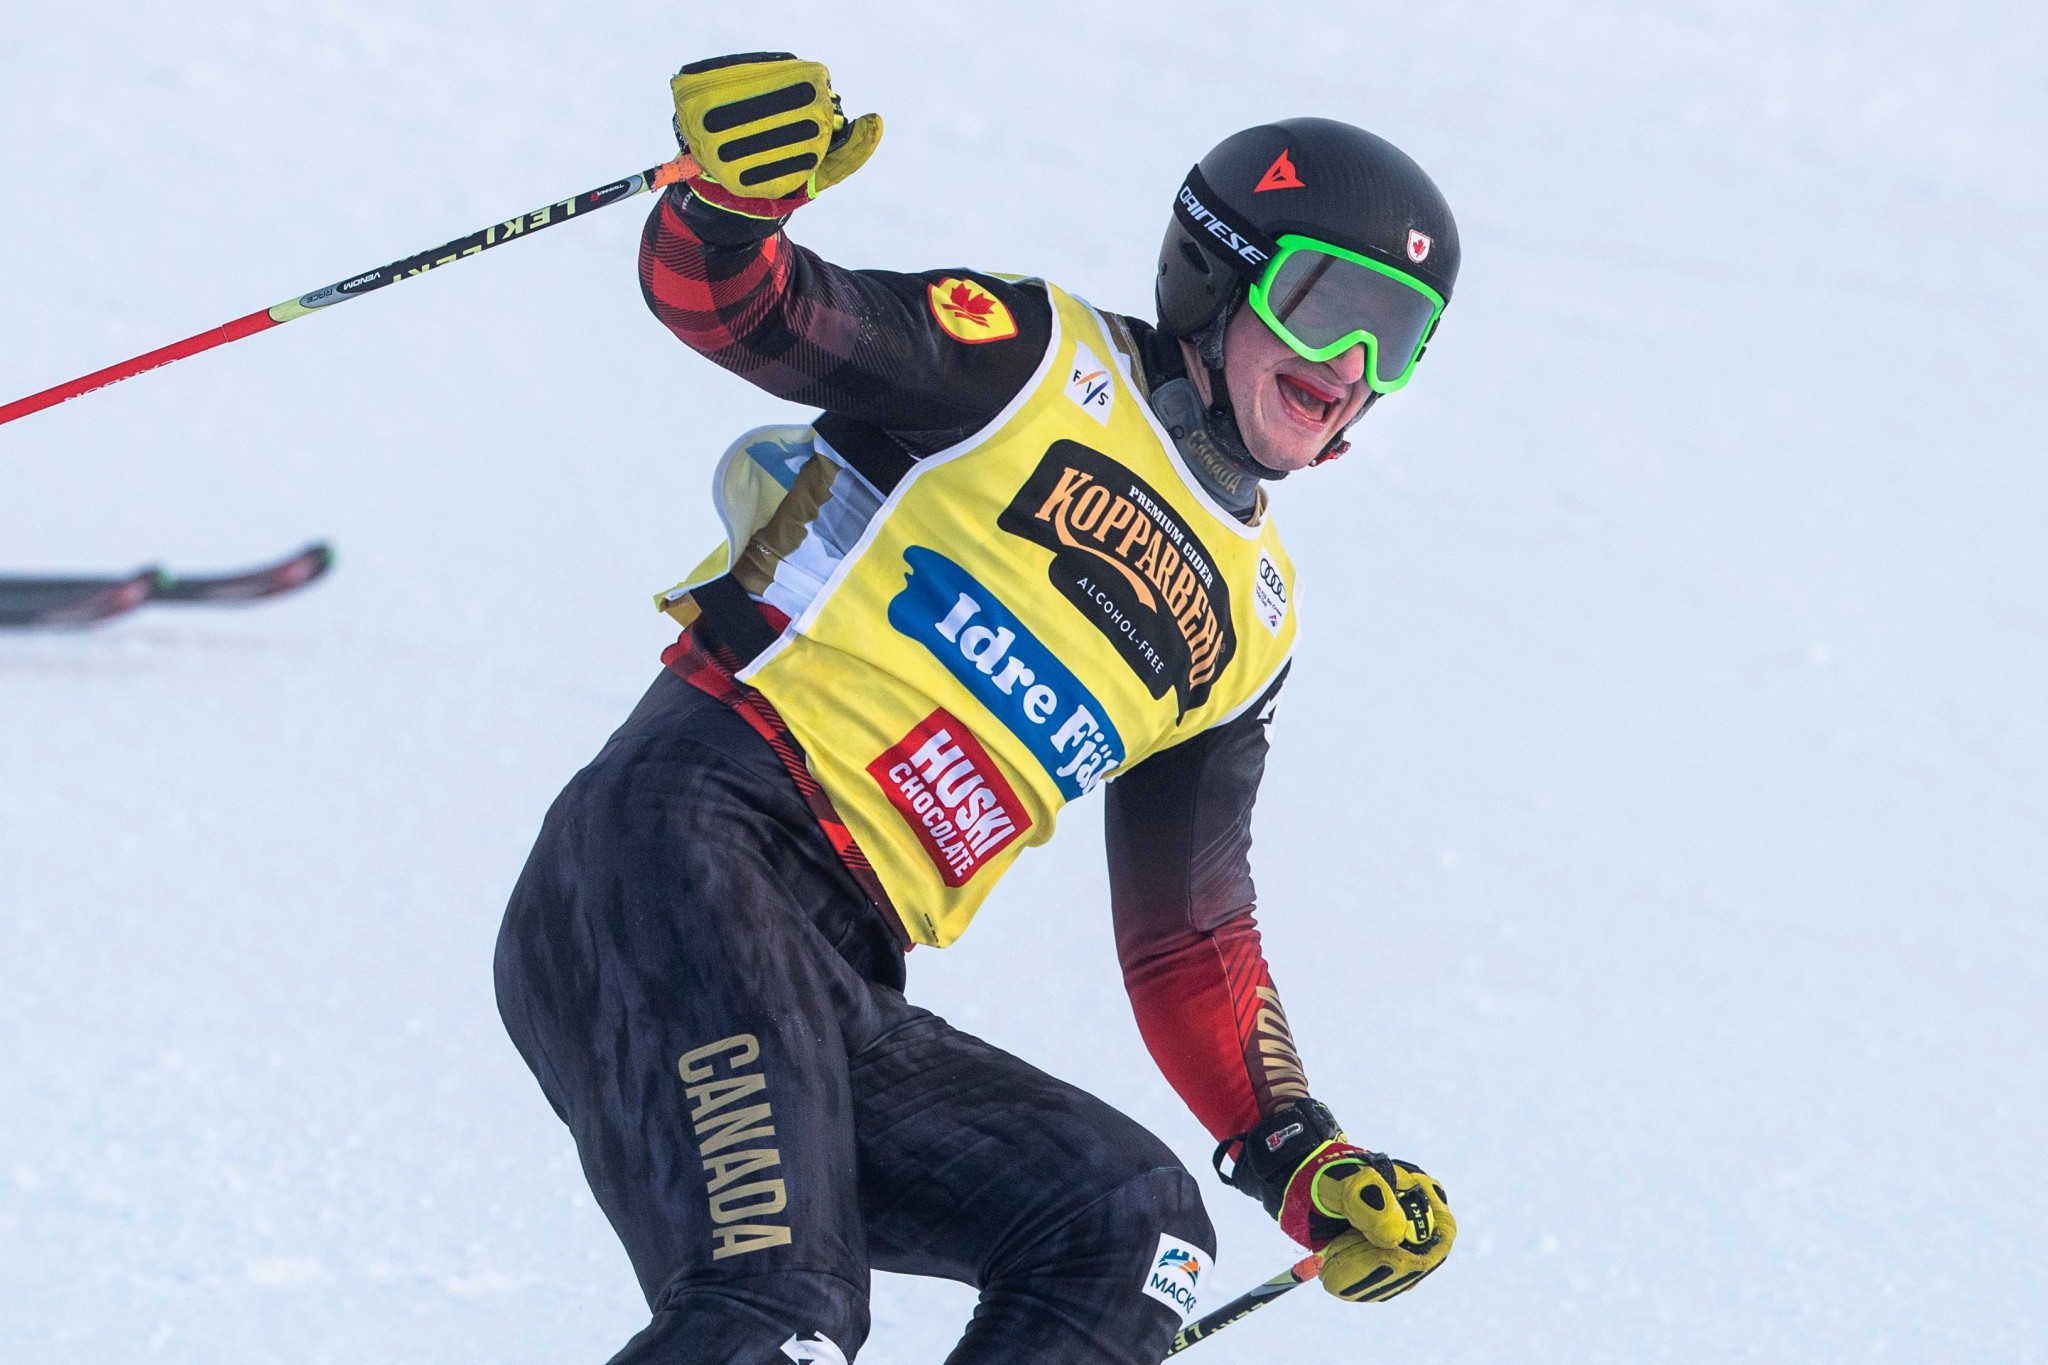 Newly-crowned Ski Cross World Cup champions Howden and Smith victorious in Russia